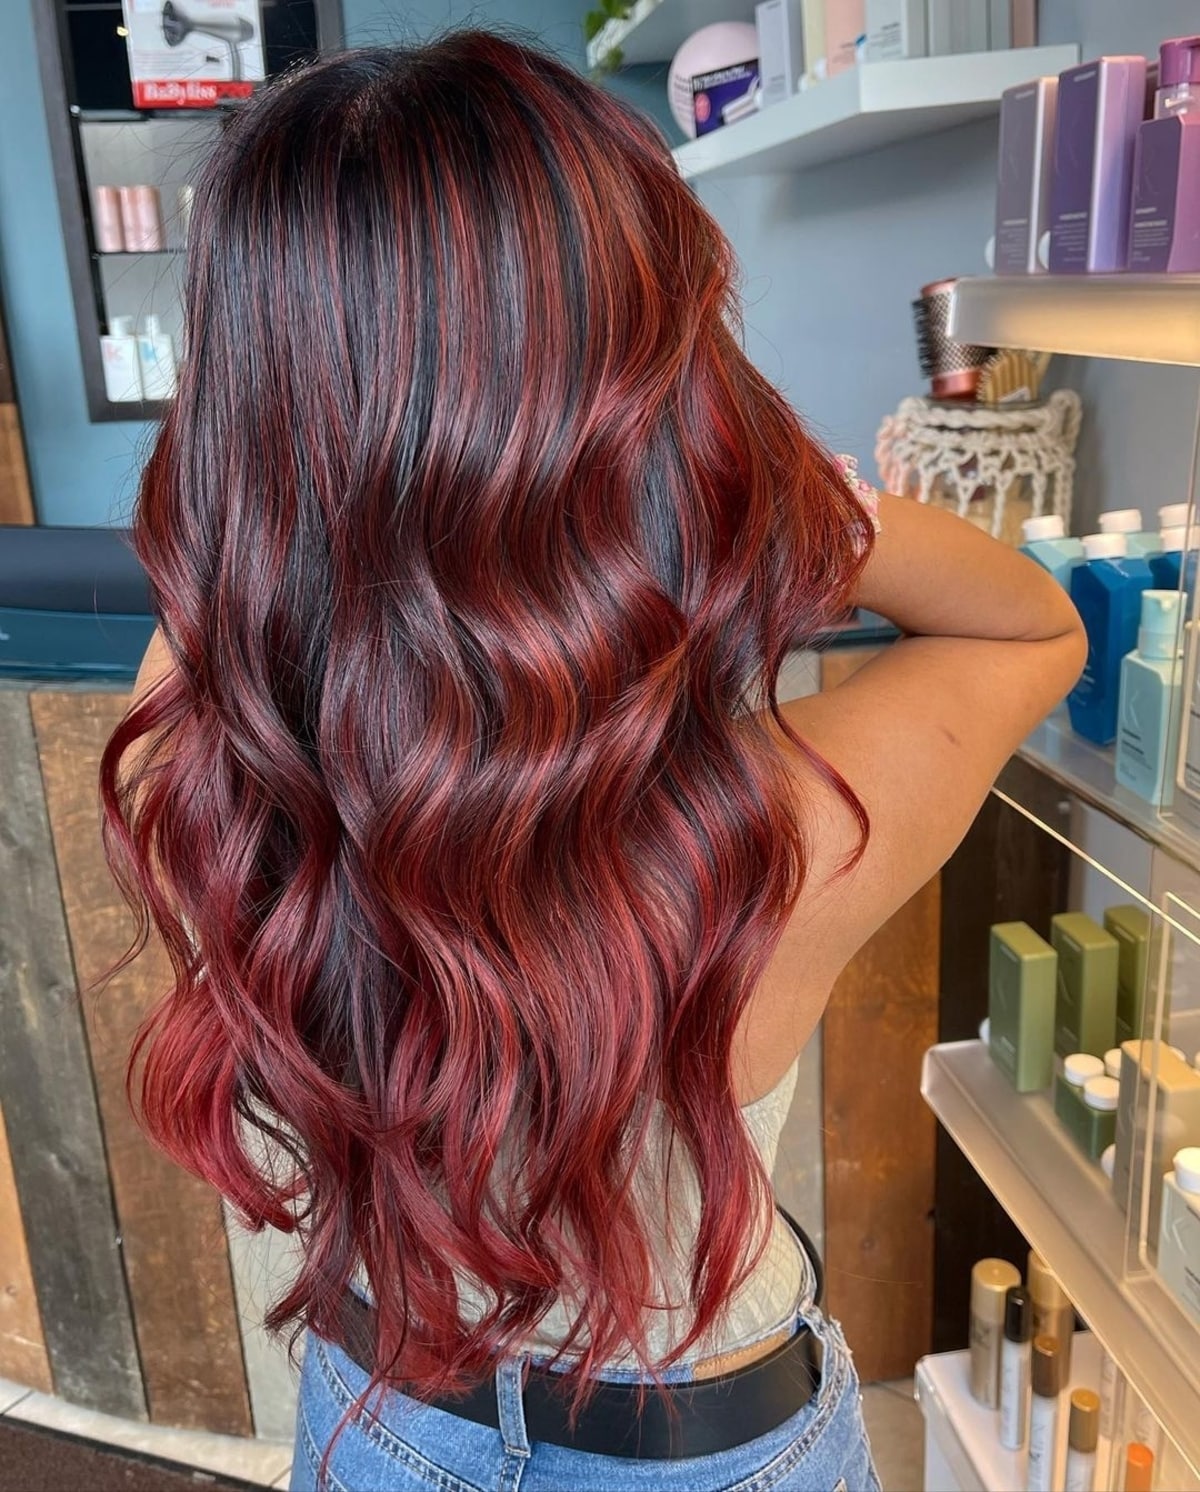 19 Best Black Hair with Red Highlights for Eye-Catching Contrast